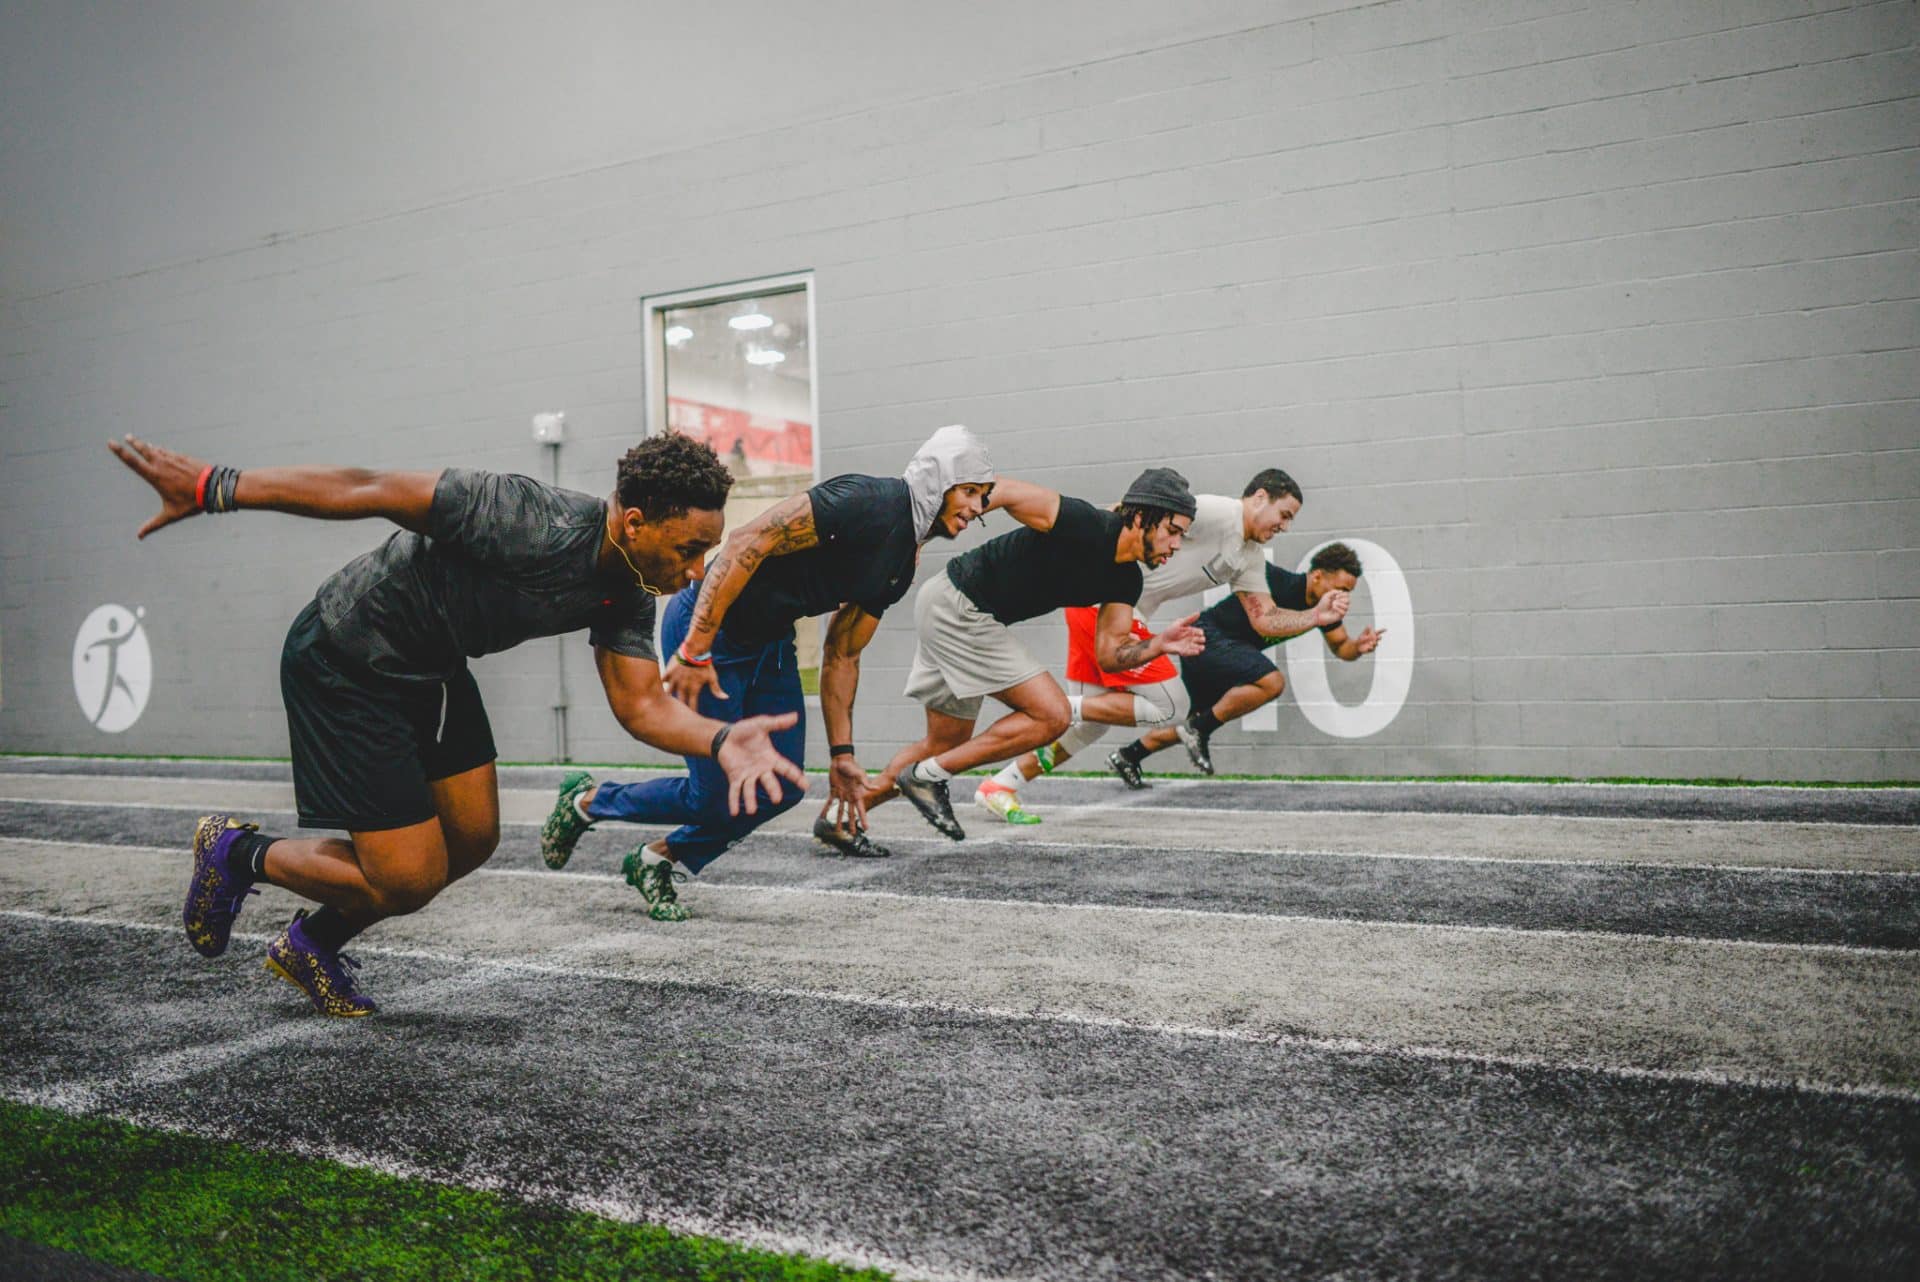 BPG Mentioned in Delaware Today: Titus Human Performance Trains Athletes to Go Pro in Wilmington